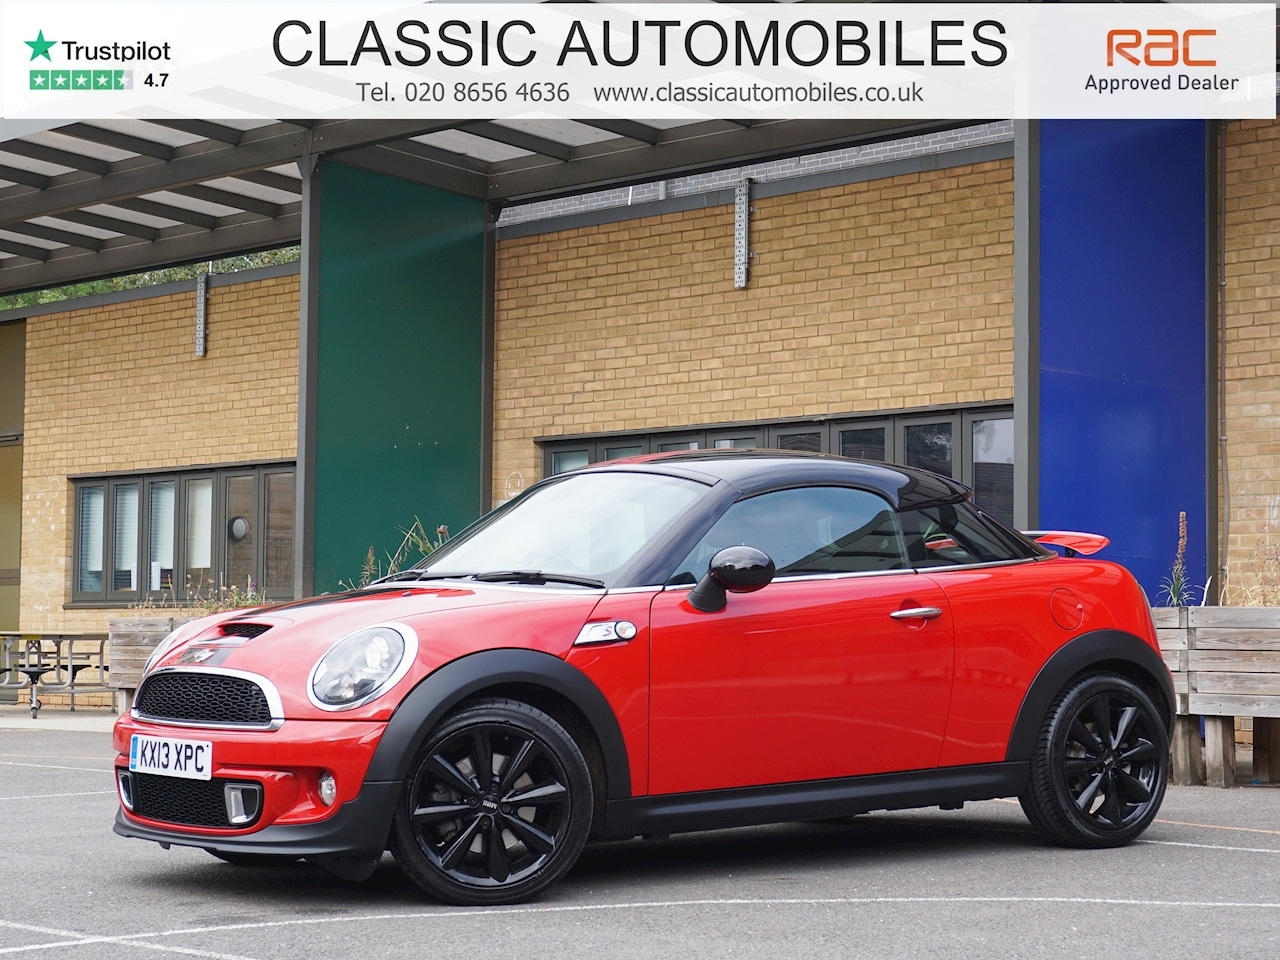 Coupe 1.6 Cooper S Coupe 2dr Petrol Manual (136 g/km, 190 bhp)